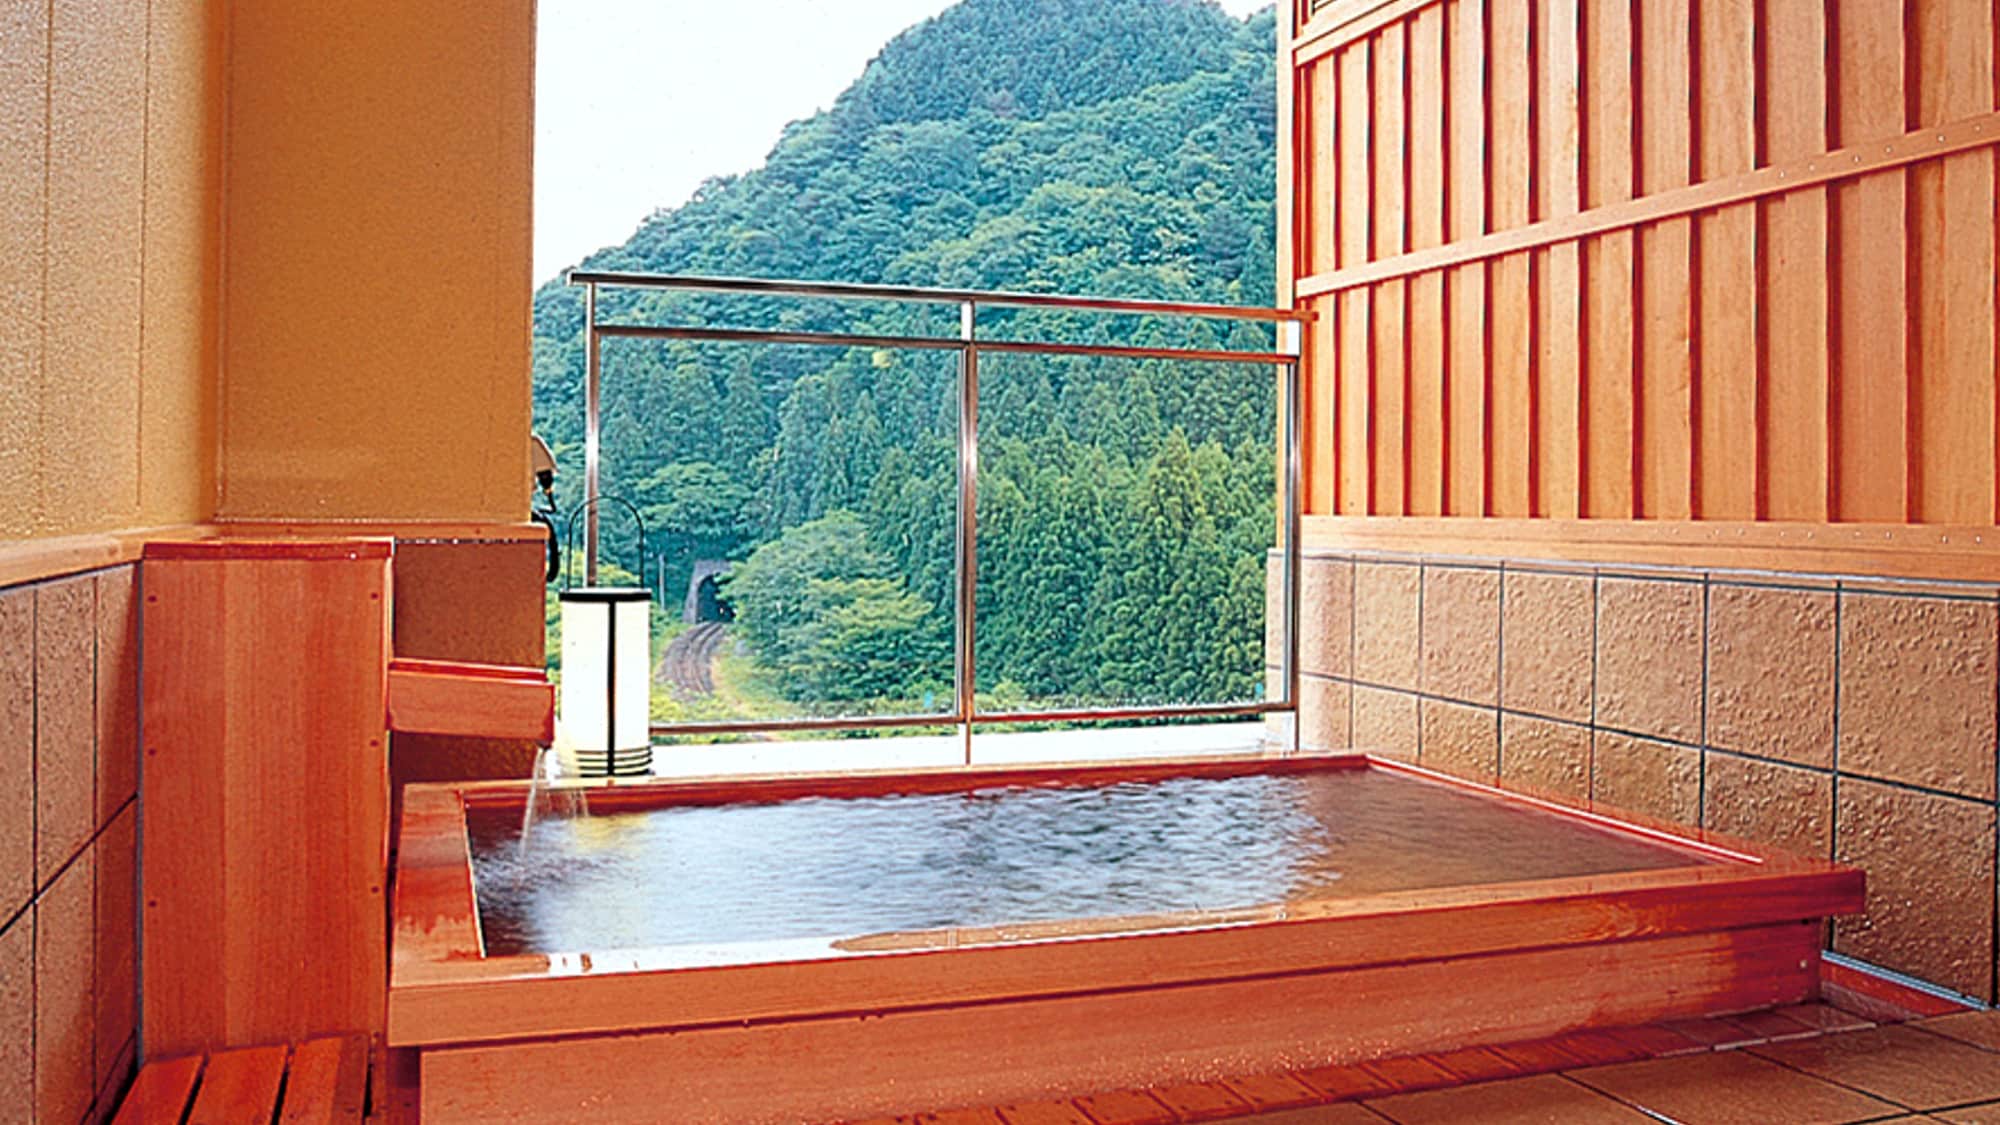 Chartered open-air bath [Hinoki-no-Yu] A cypress-made bathtub that flows directly from the source